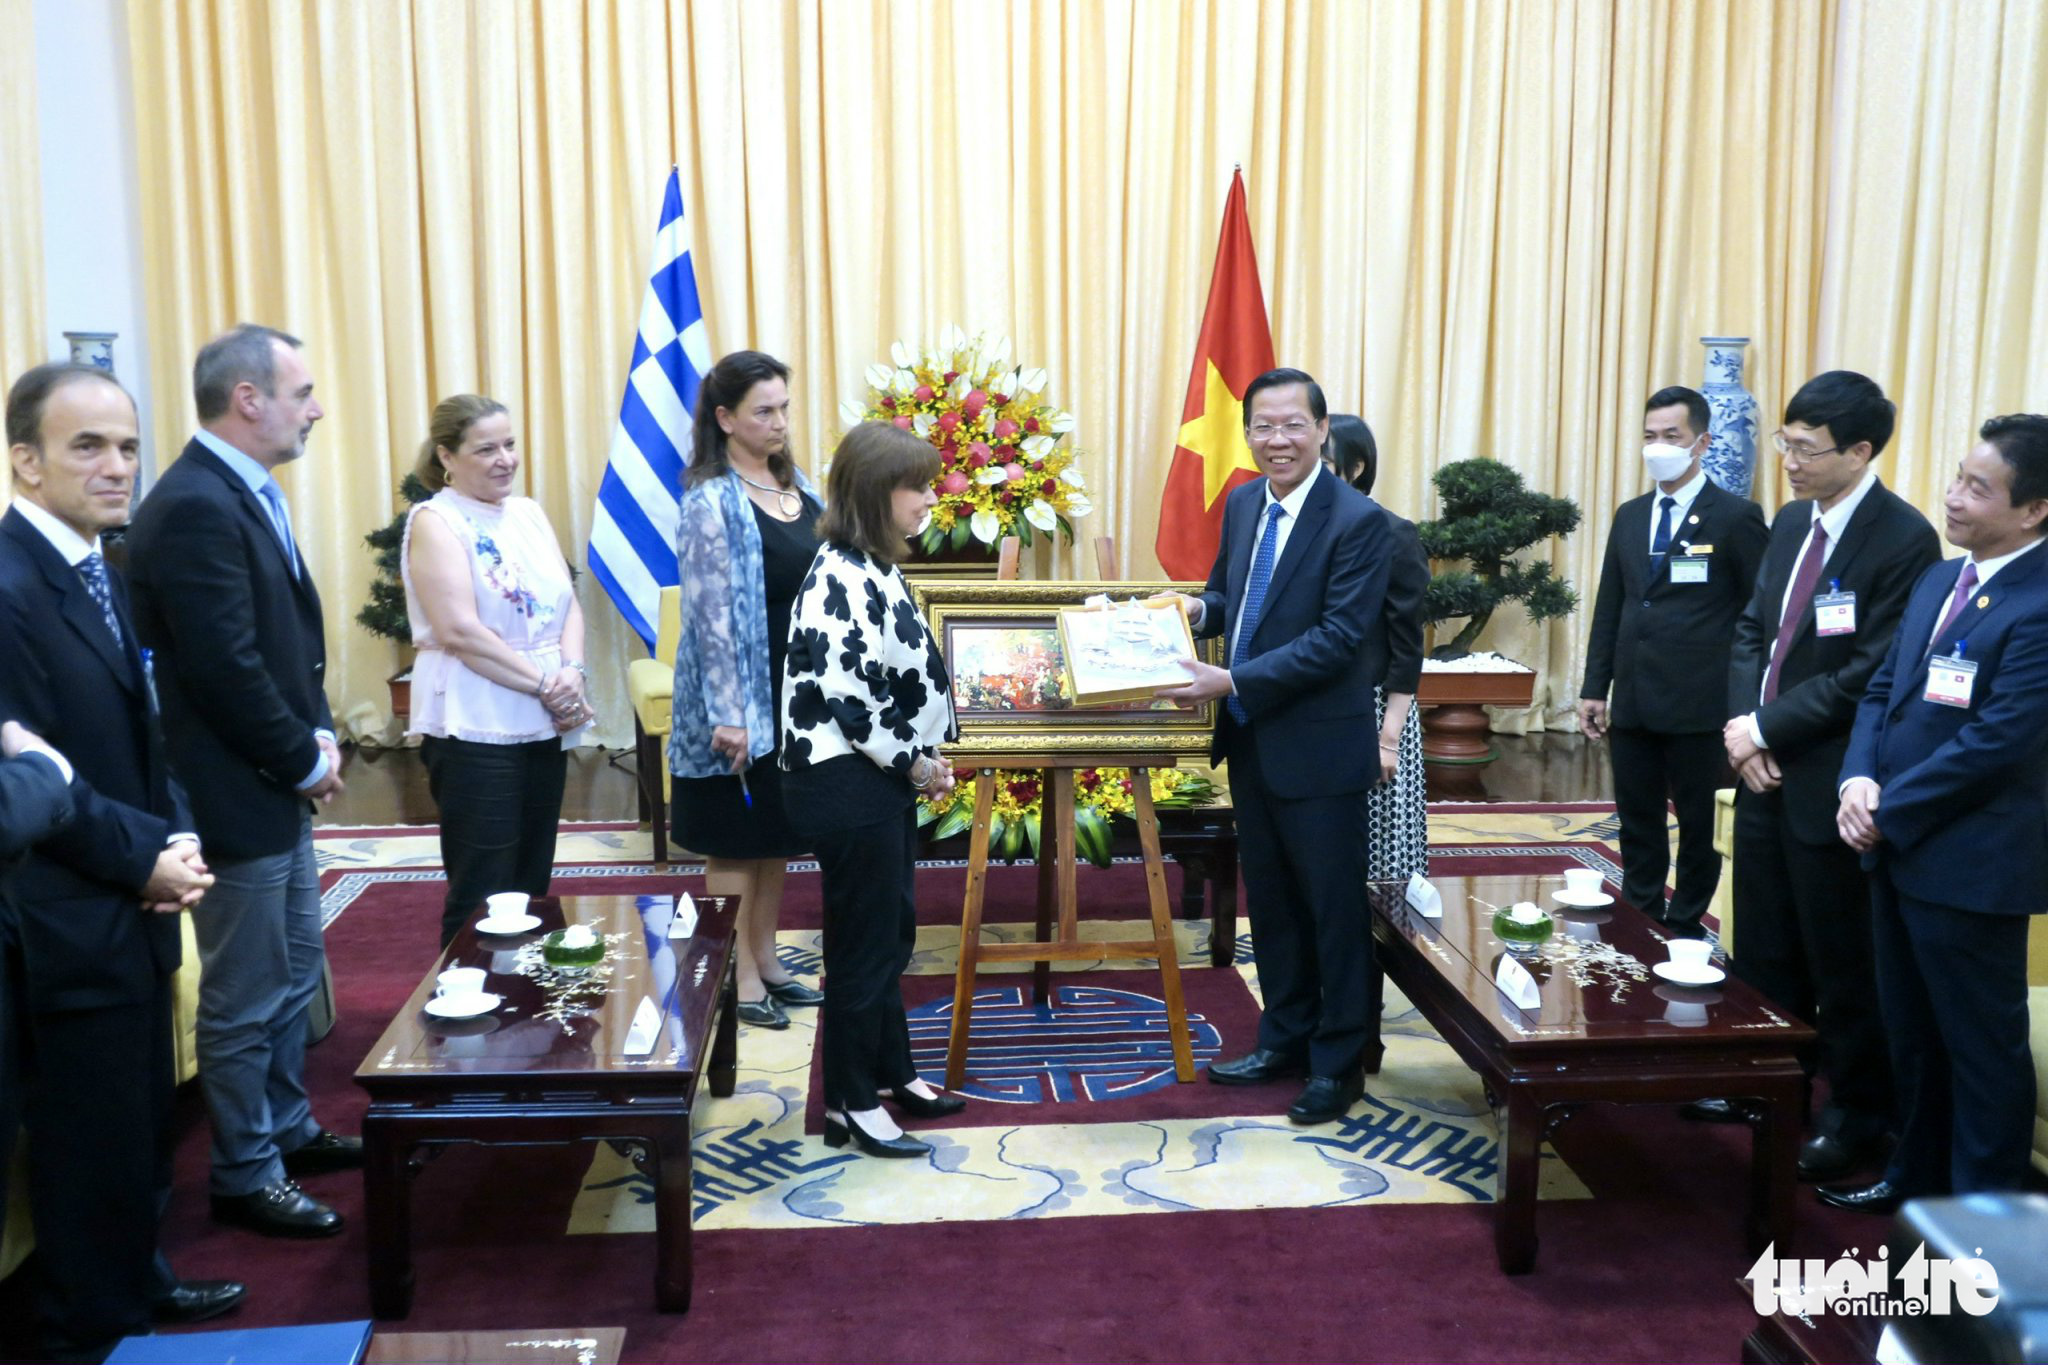 Ho Chi Minh City chairman Phan Van Mai receives a gift from Greek President Katerina Sakellaropoulou following their talks in Ho Chi Minh City, May 18, 2022. Photo: T.T.D. / Tuoi Tre